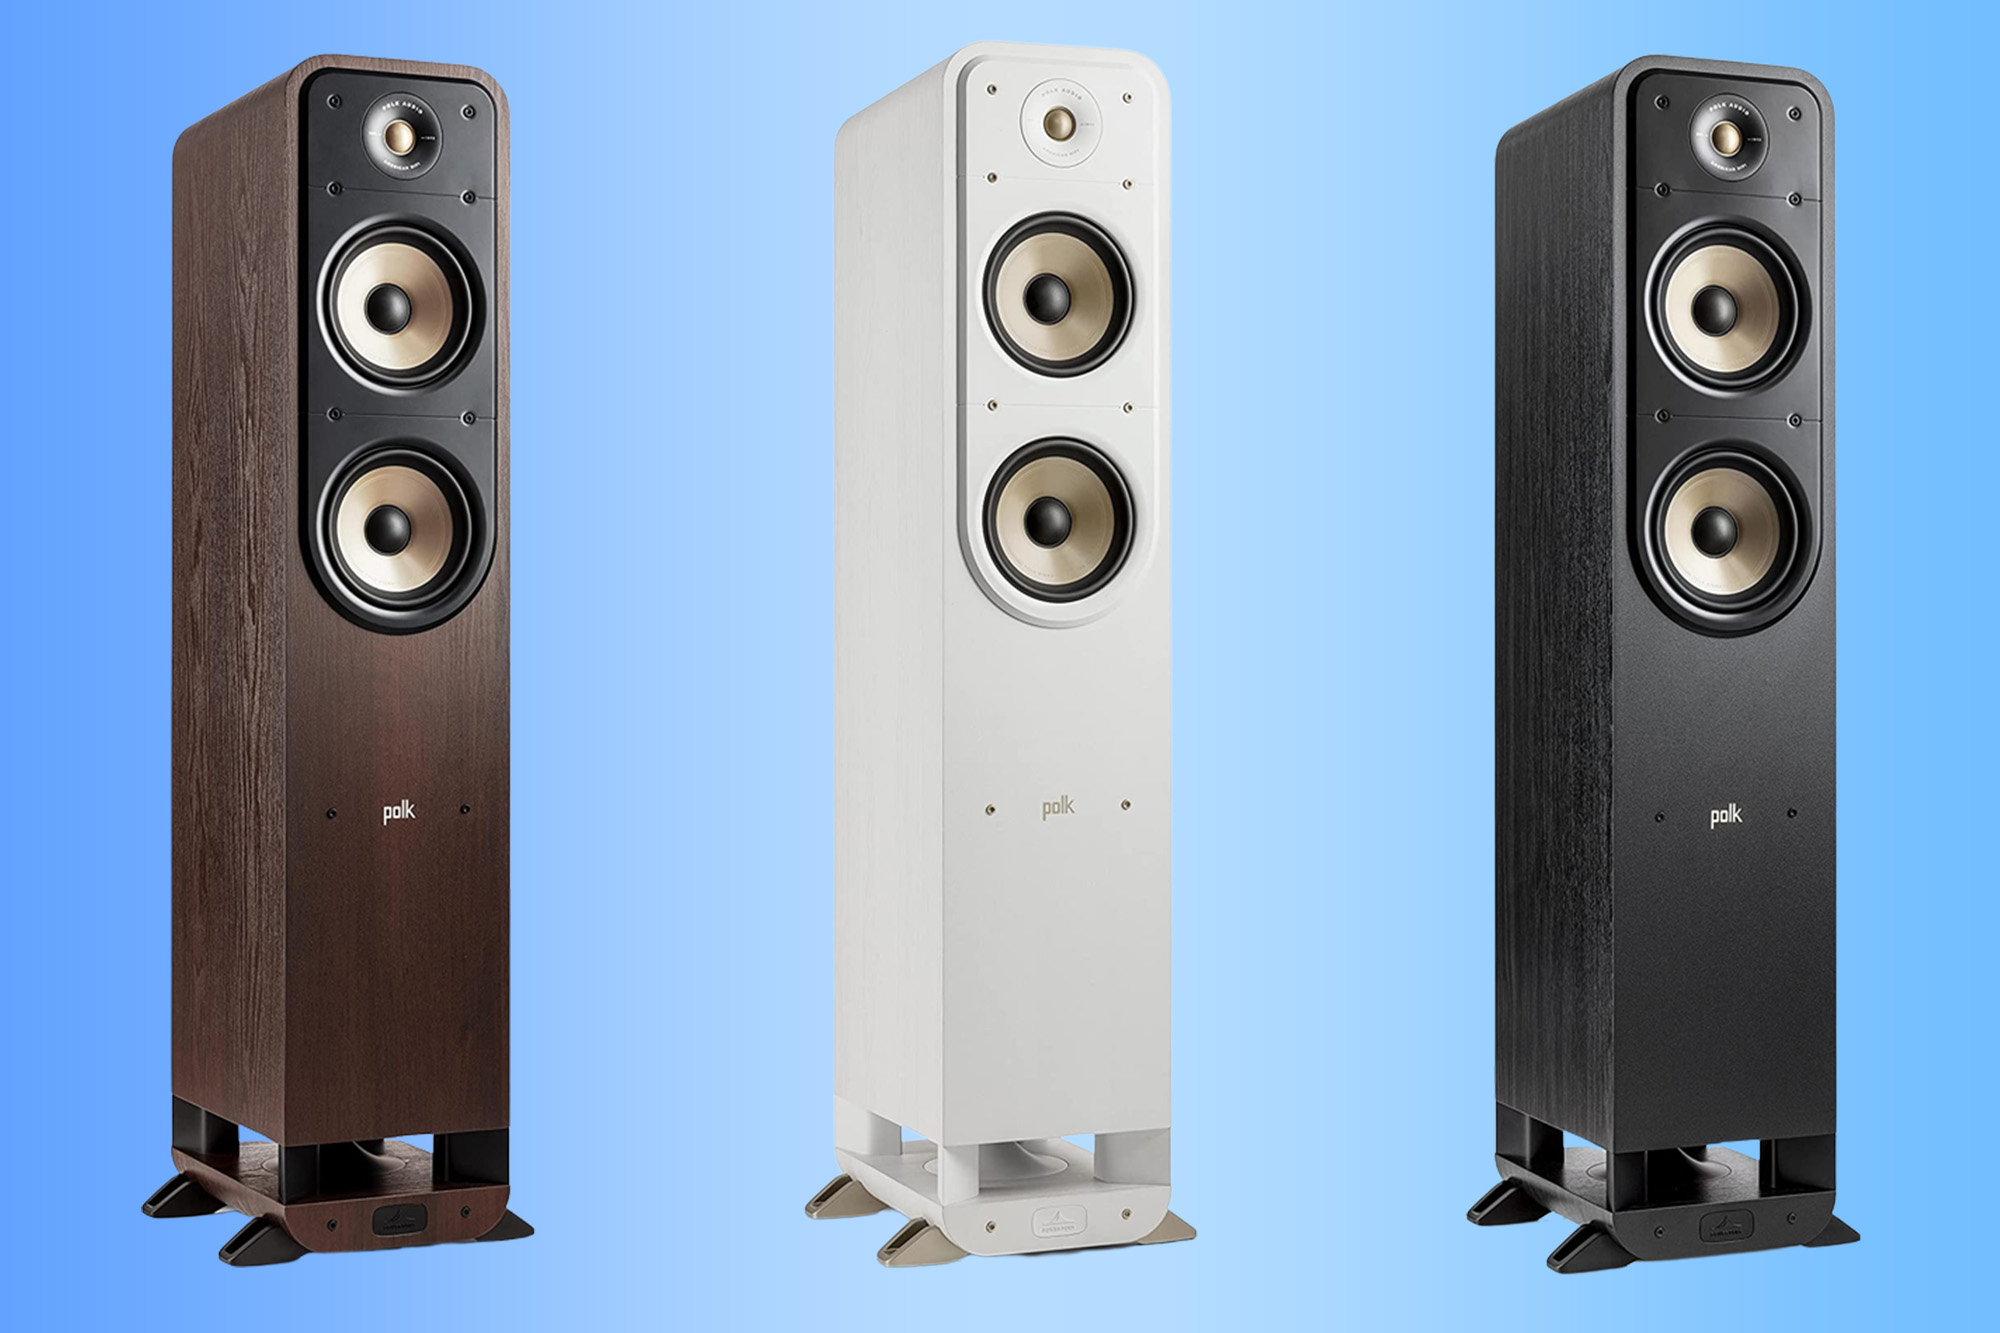 This Amazon deal surrounds you with savings on Polk Audio’s cinema-grade speakers